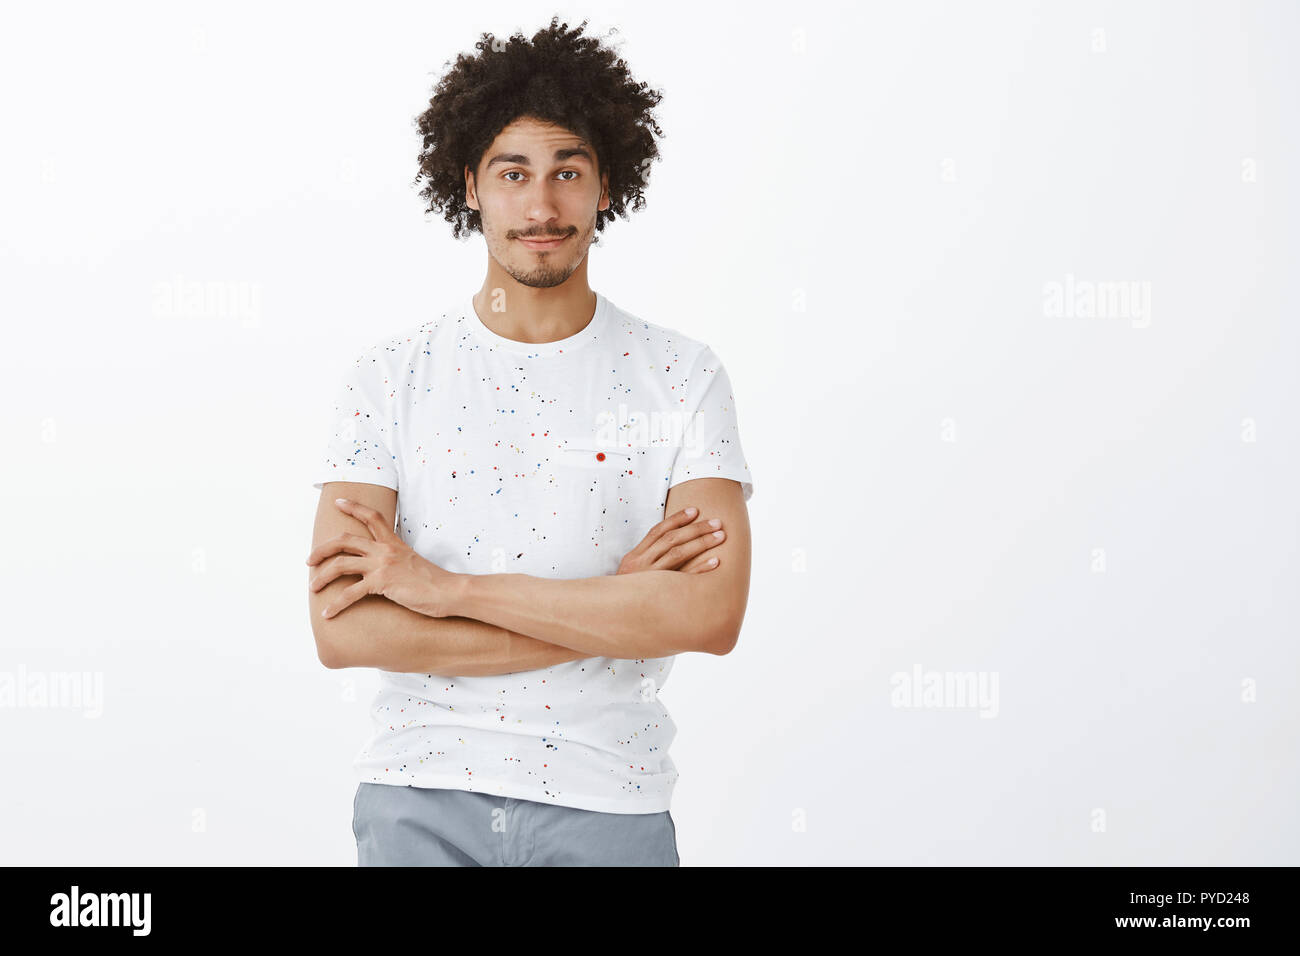 Man having bet with friend, being confident he win. Portrait of attractive carefree hispanic guy with tanned skin and curly hair, holding hands crossed with self-assured smile standing over grey wall Stock Photo